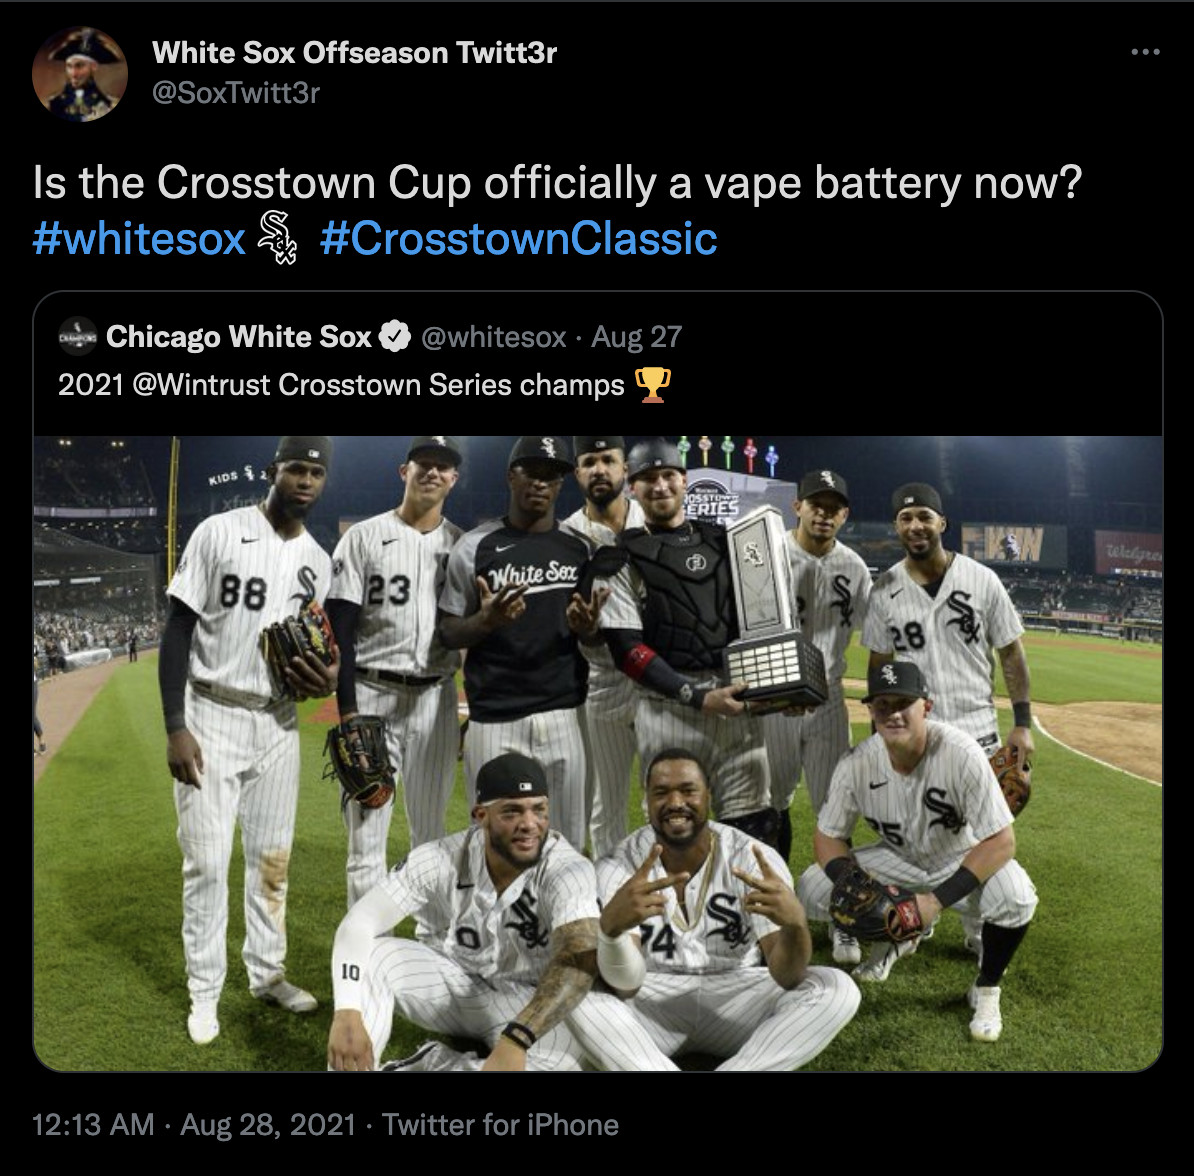 White Sox and Crosstown trophy which looks like a vape more than a trophy.